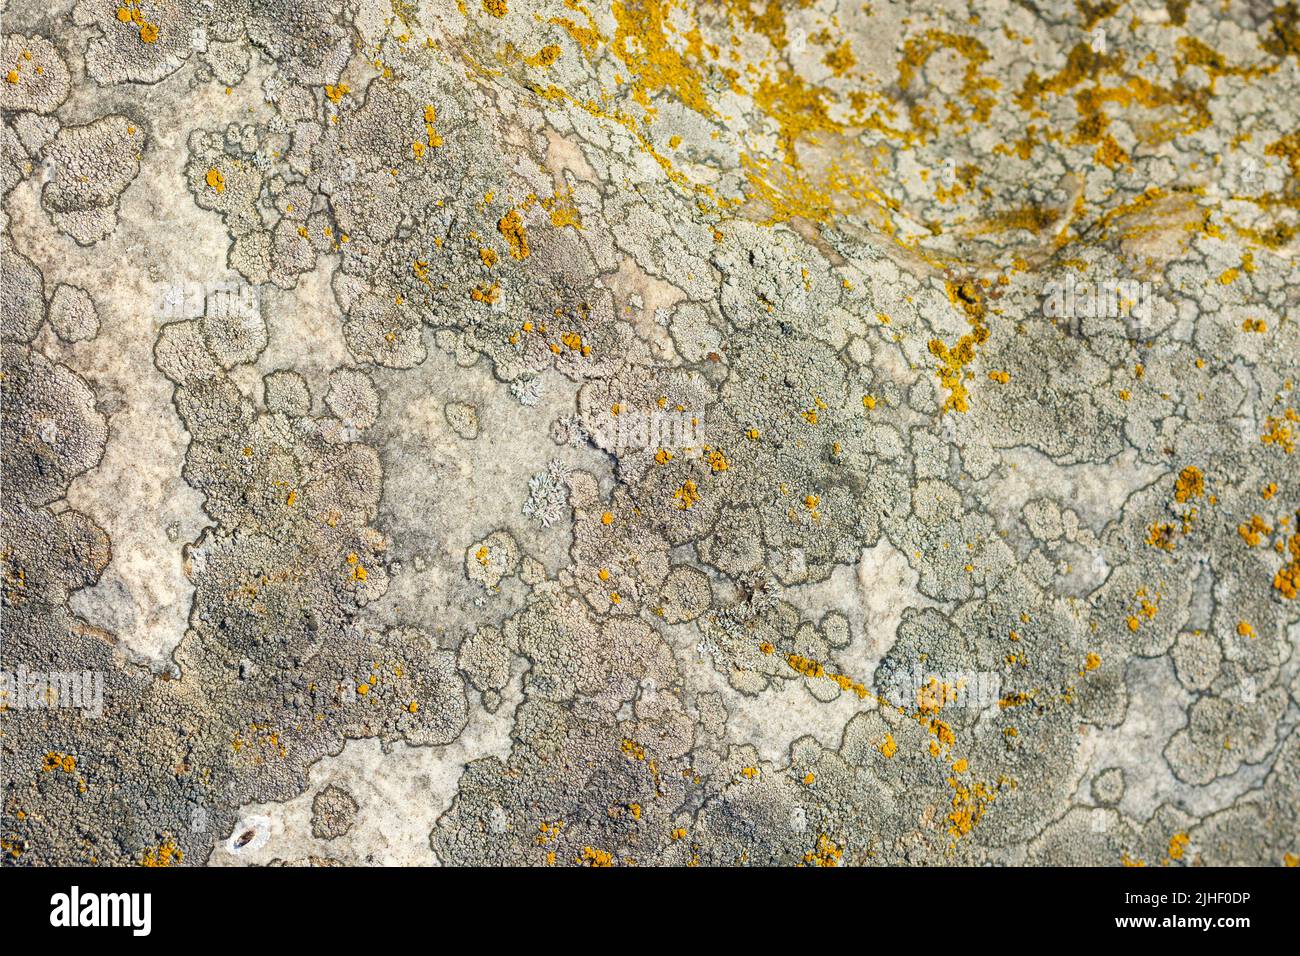 golden moonglow lichen presumably Dimelanea oreina Norman on quartzite sandstone surface under direct sunlight - full-frame texture and background Stock Photo